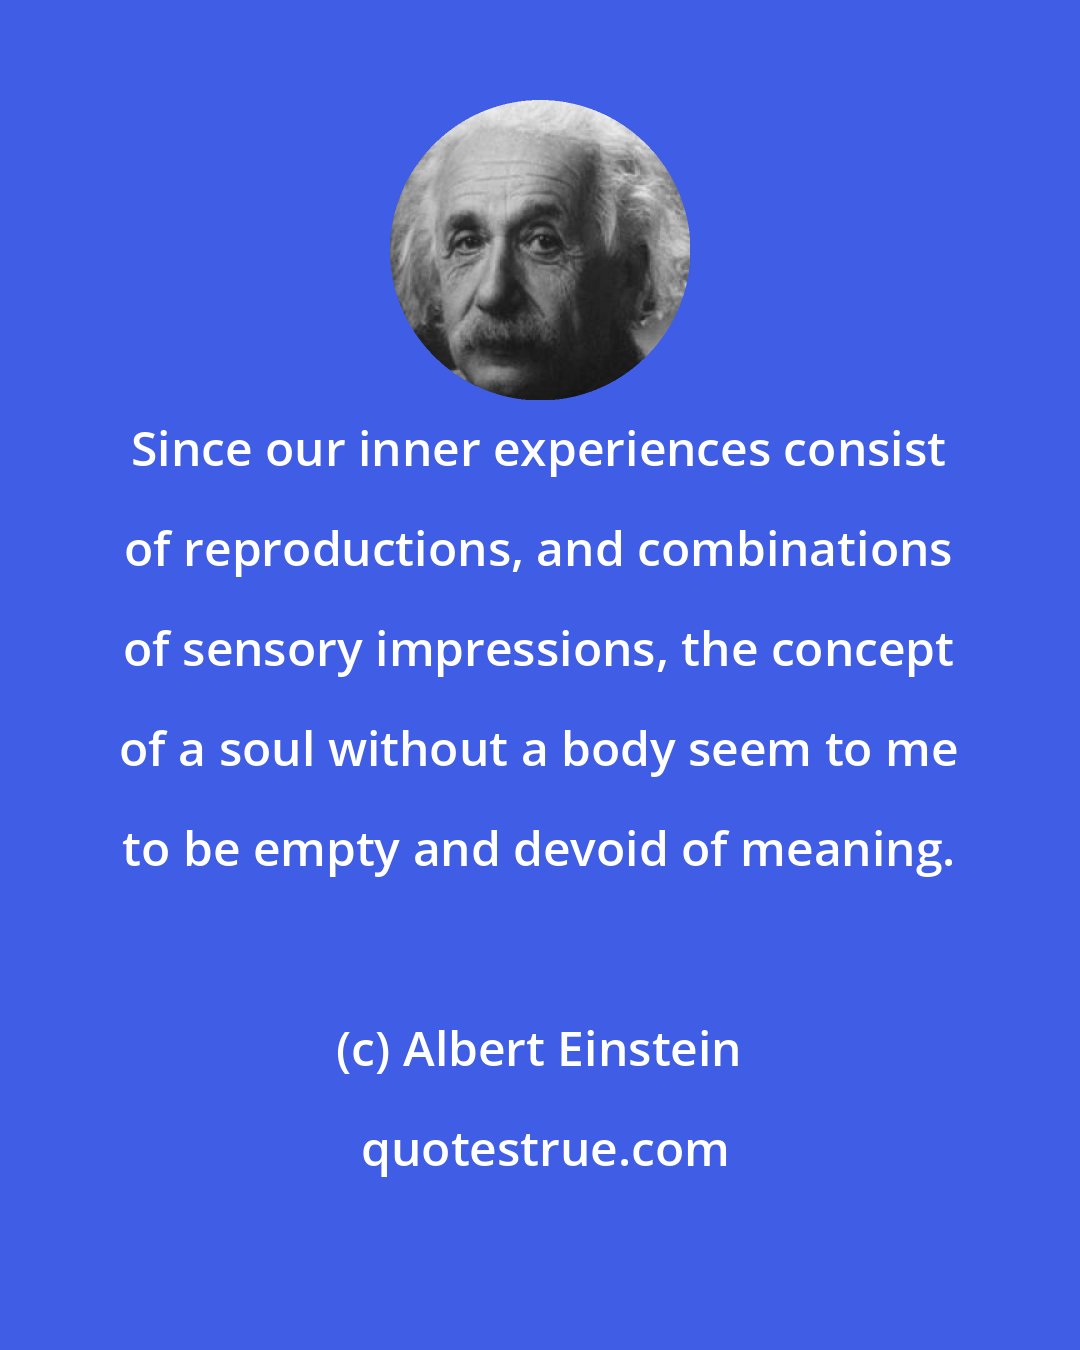 Albert Einstein: Since our inner experiences consist of reproductions, and combinations of sensory impressions, the concept of a soul without a body seem to me to be empty and devoid of meaning.